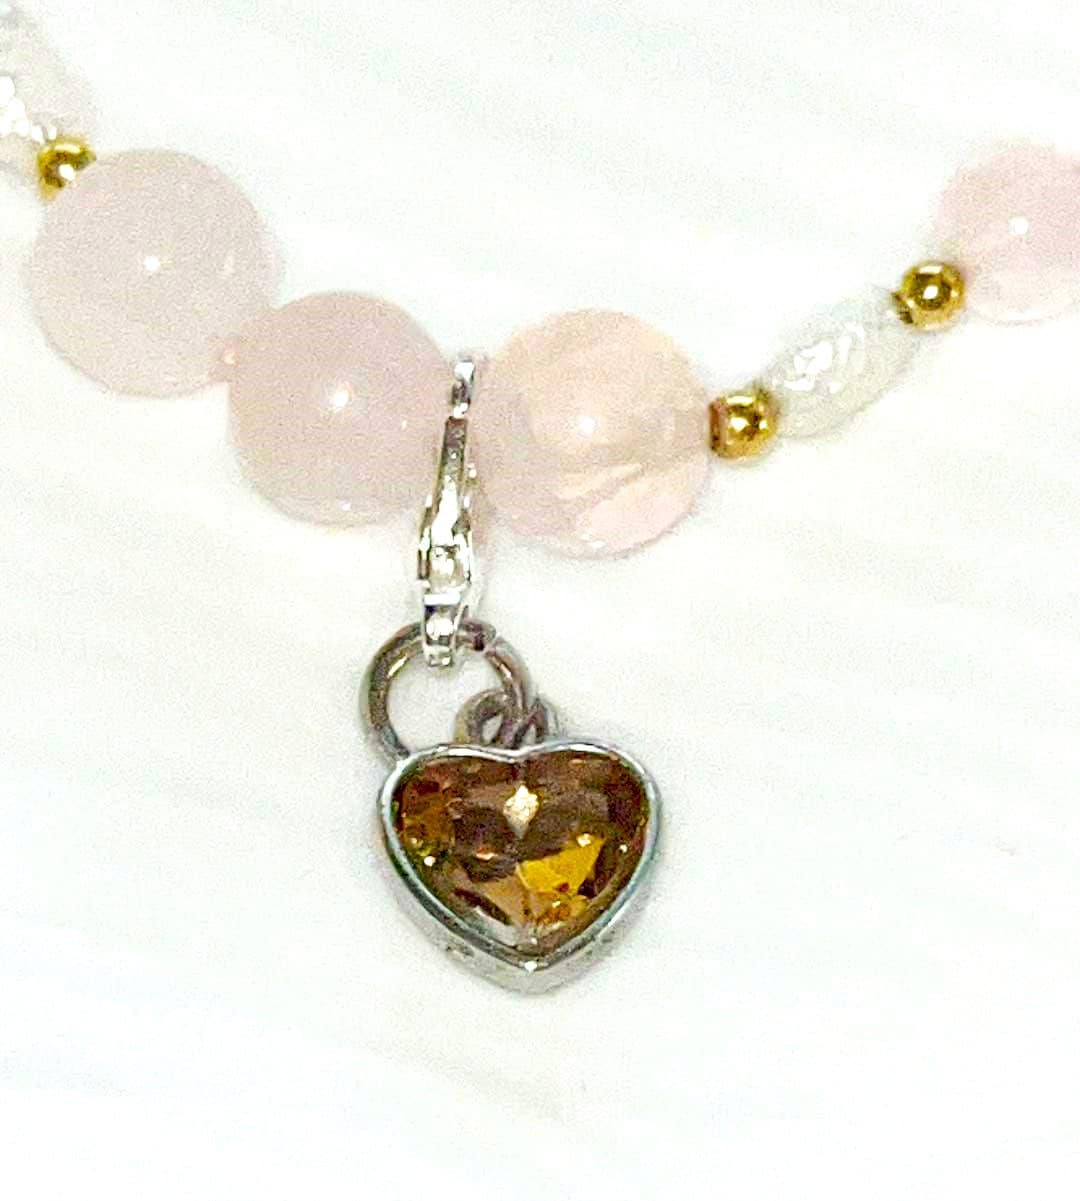 Rose Quartz beaded Bracelet w/ gold beads & pearl accents. Radiate Love, emotional healing, compassion, unconditional love and harmony